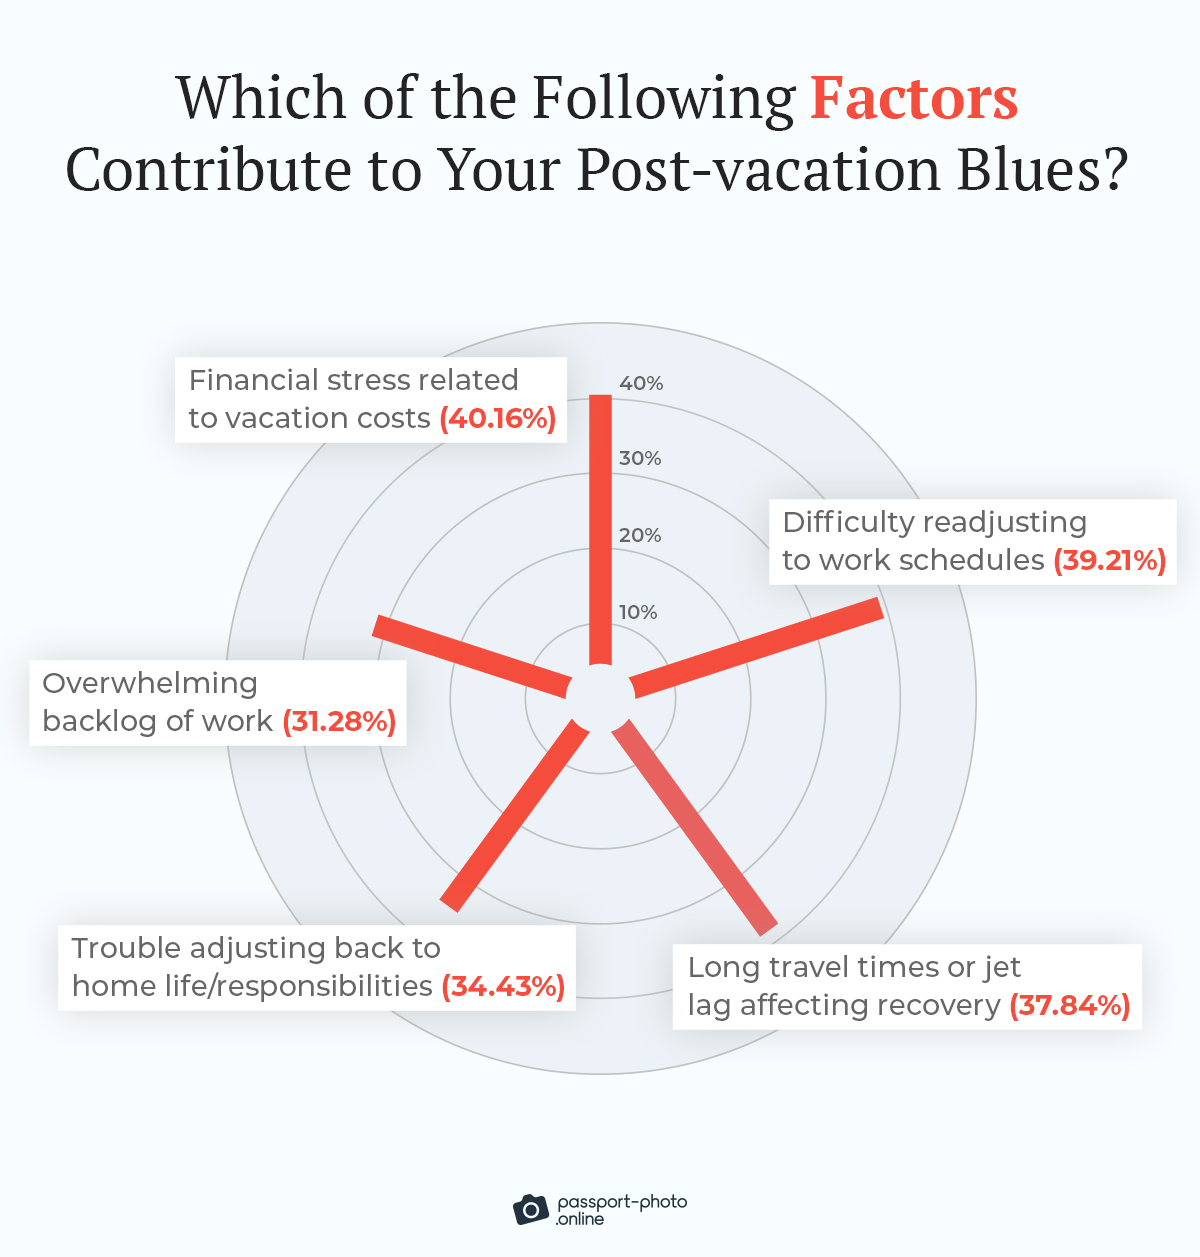 List of factors contributing to post-vacation blues